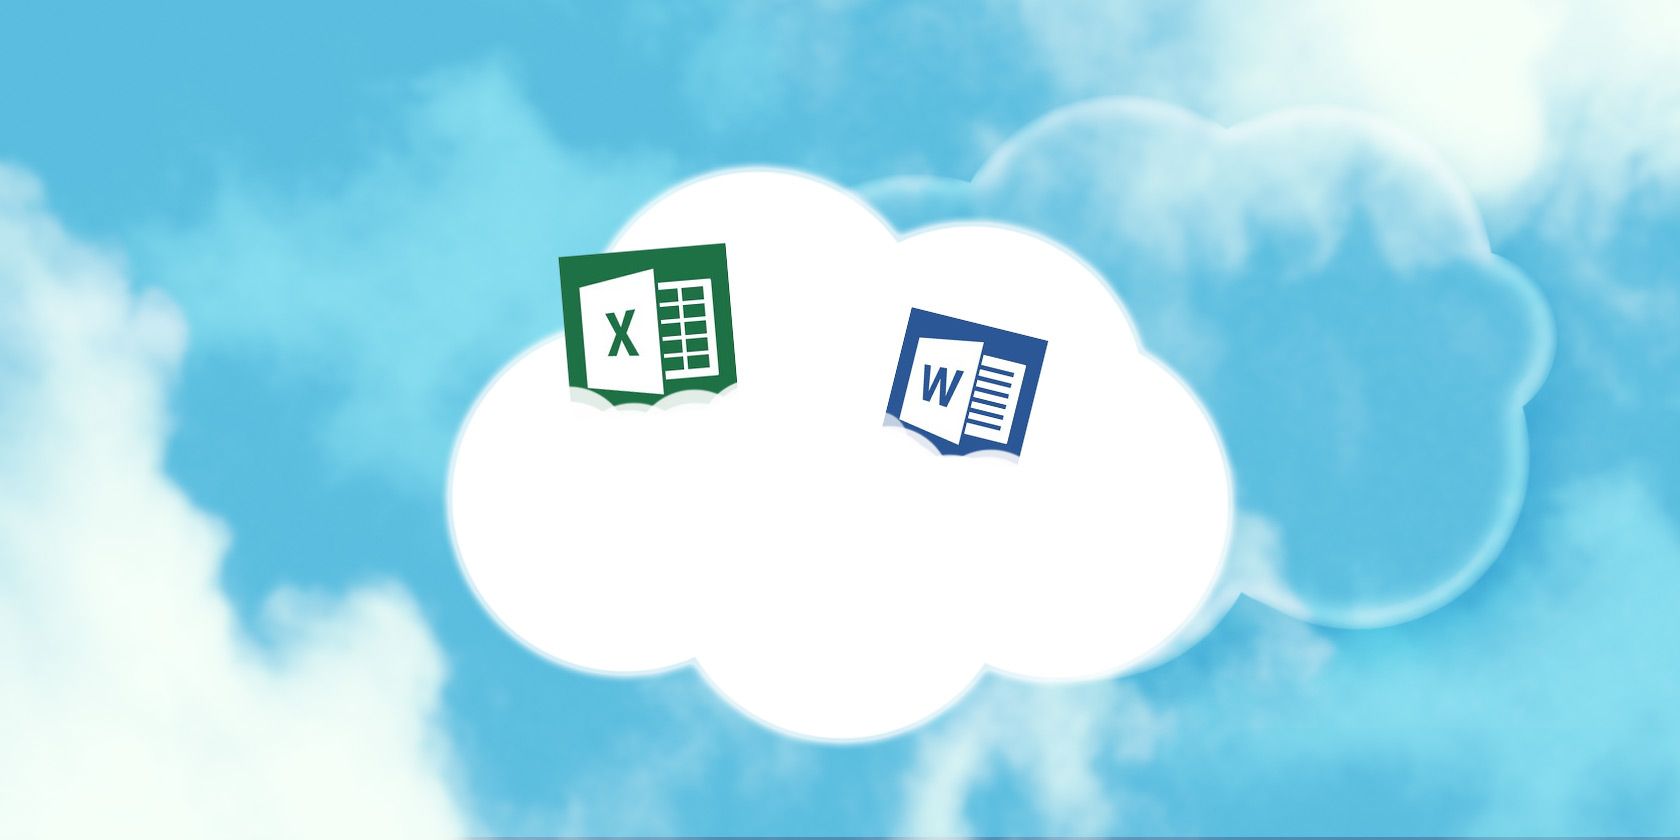 Word and Excel icons in a cloud